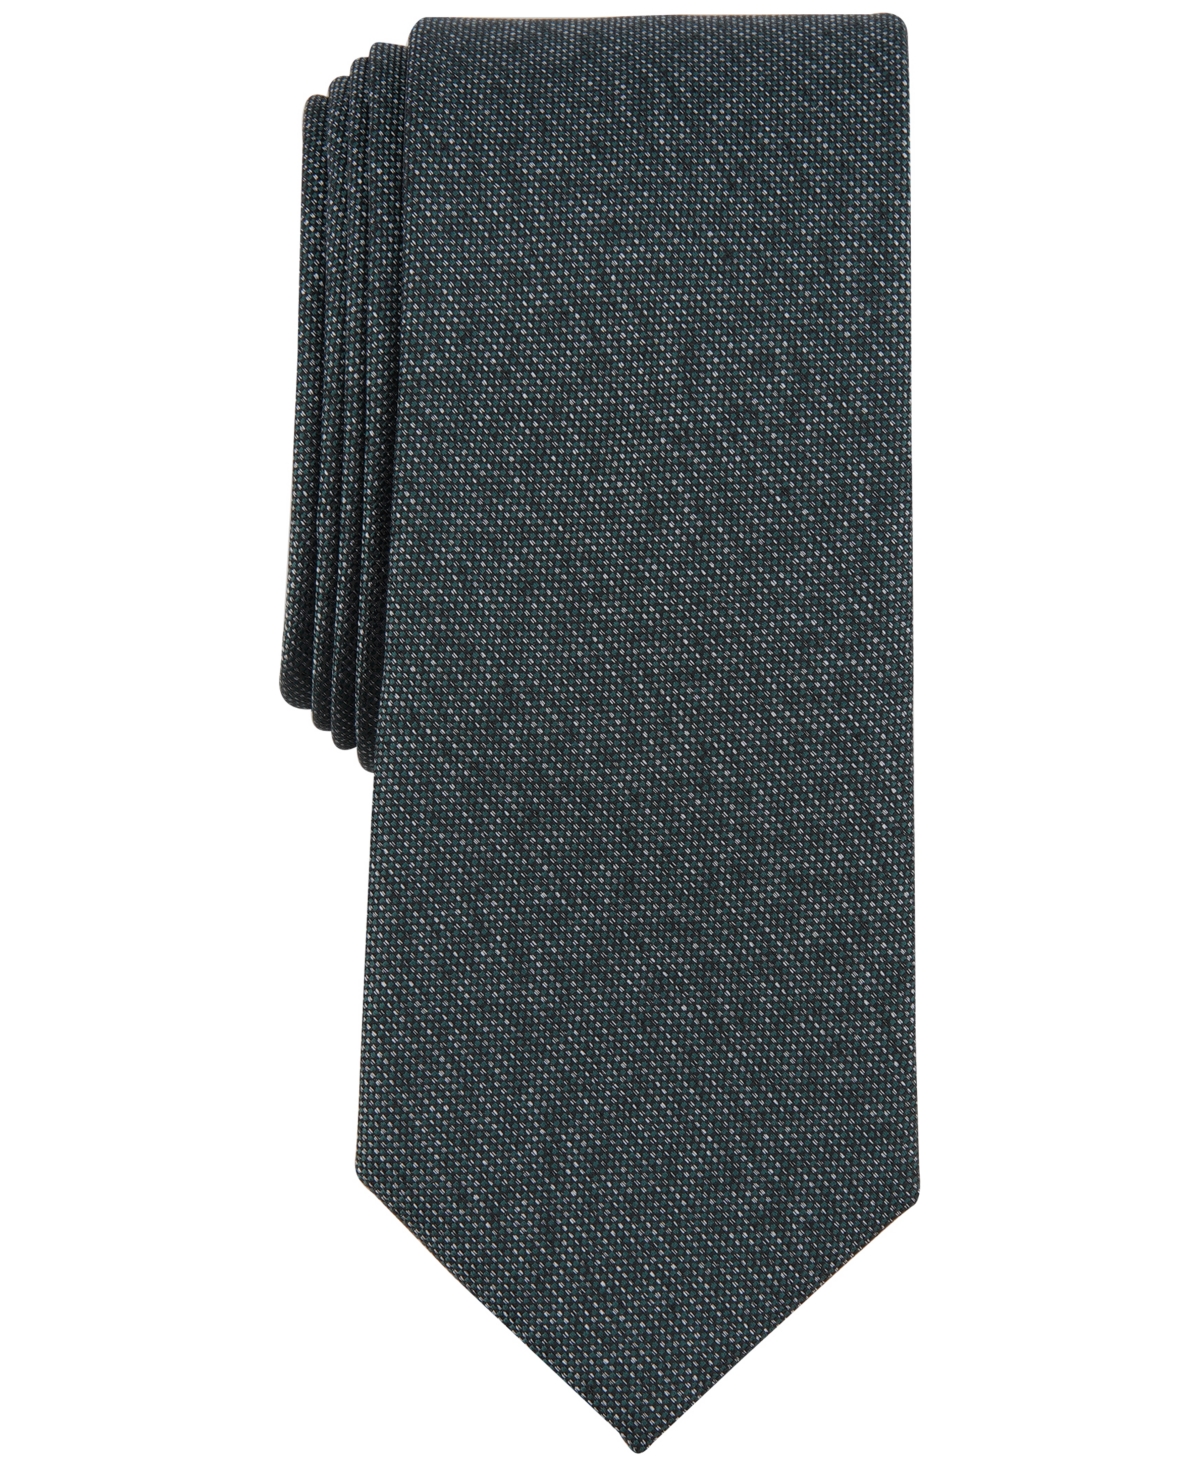 Men's Cobbled Solid Tie, Created for Macy's - Taupe